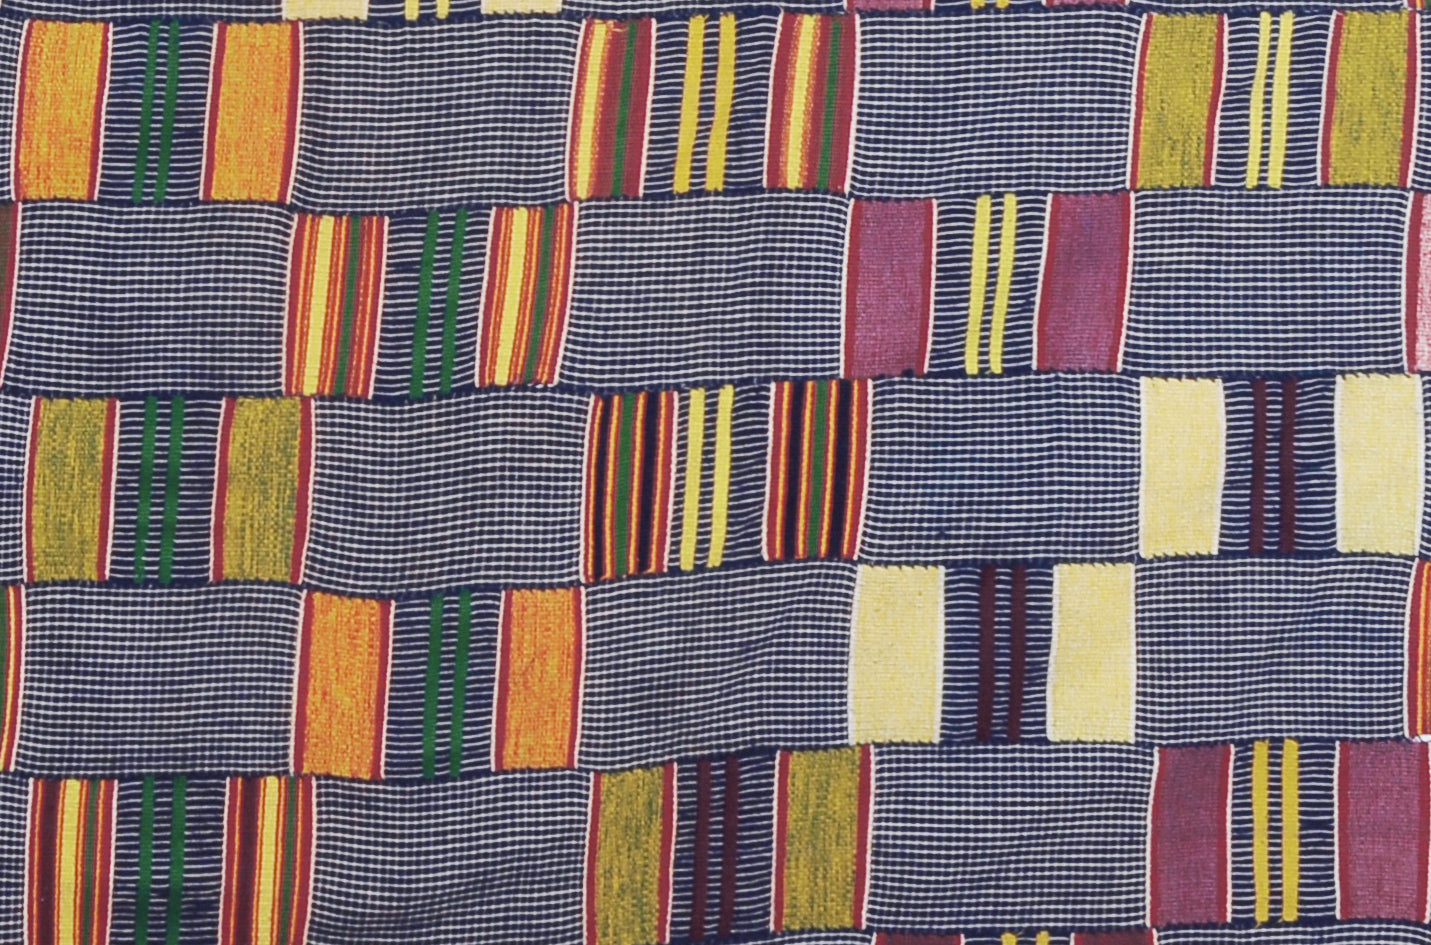 Authentic 1960s Ewe Kente Cloth from Ghana - A Tapestry of Tradition Guinea Fowl